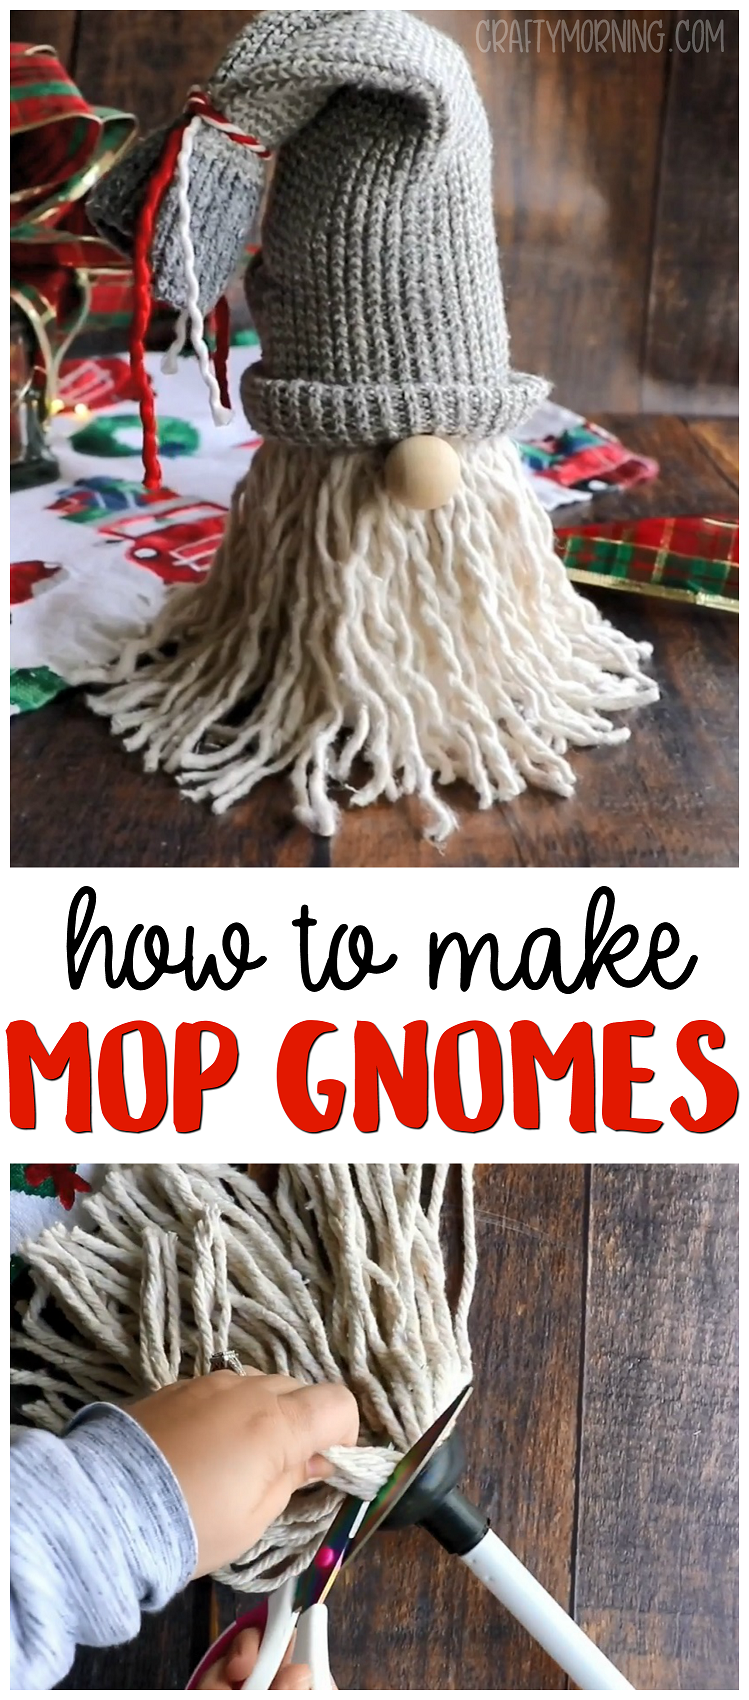 DIY Mop Gnomes - Crafts -   16 diy projects For The Home kids ideas